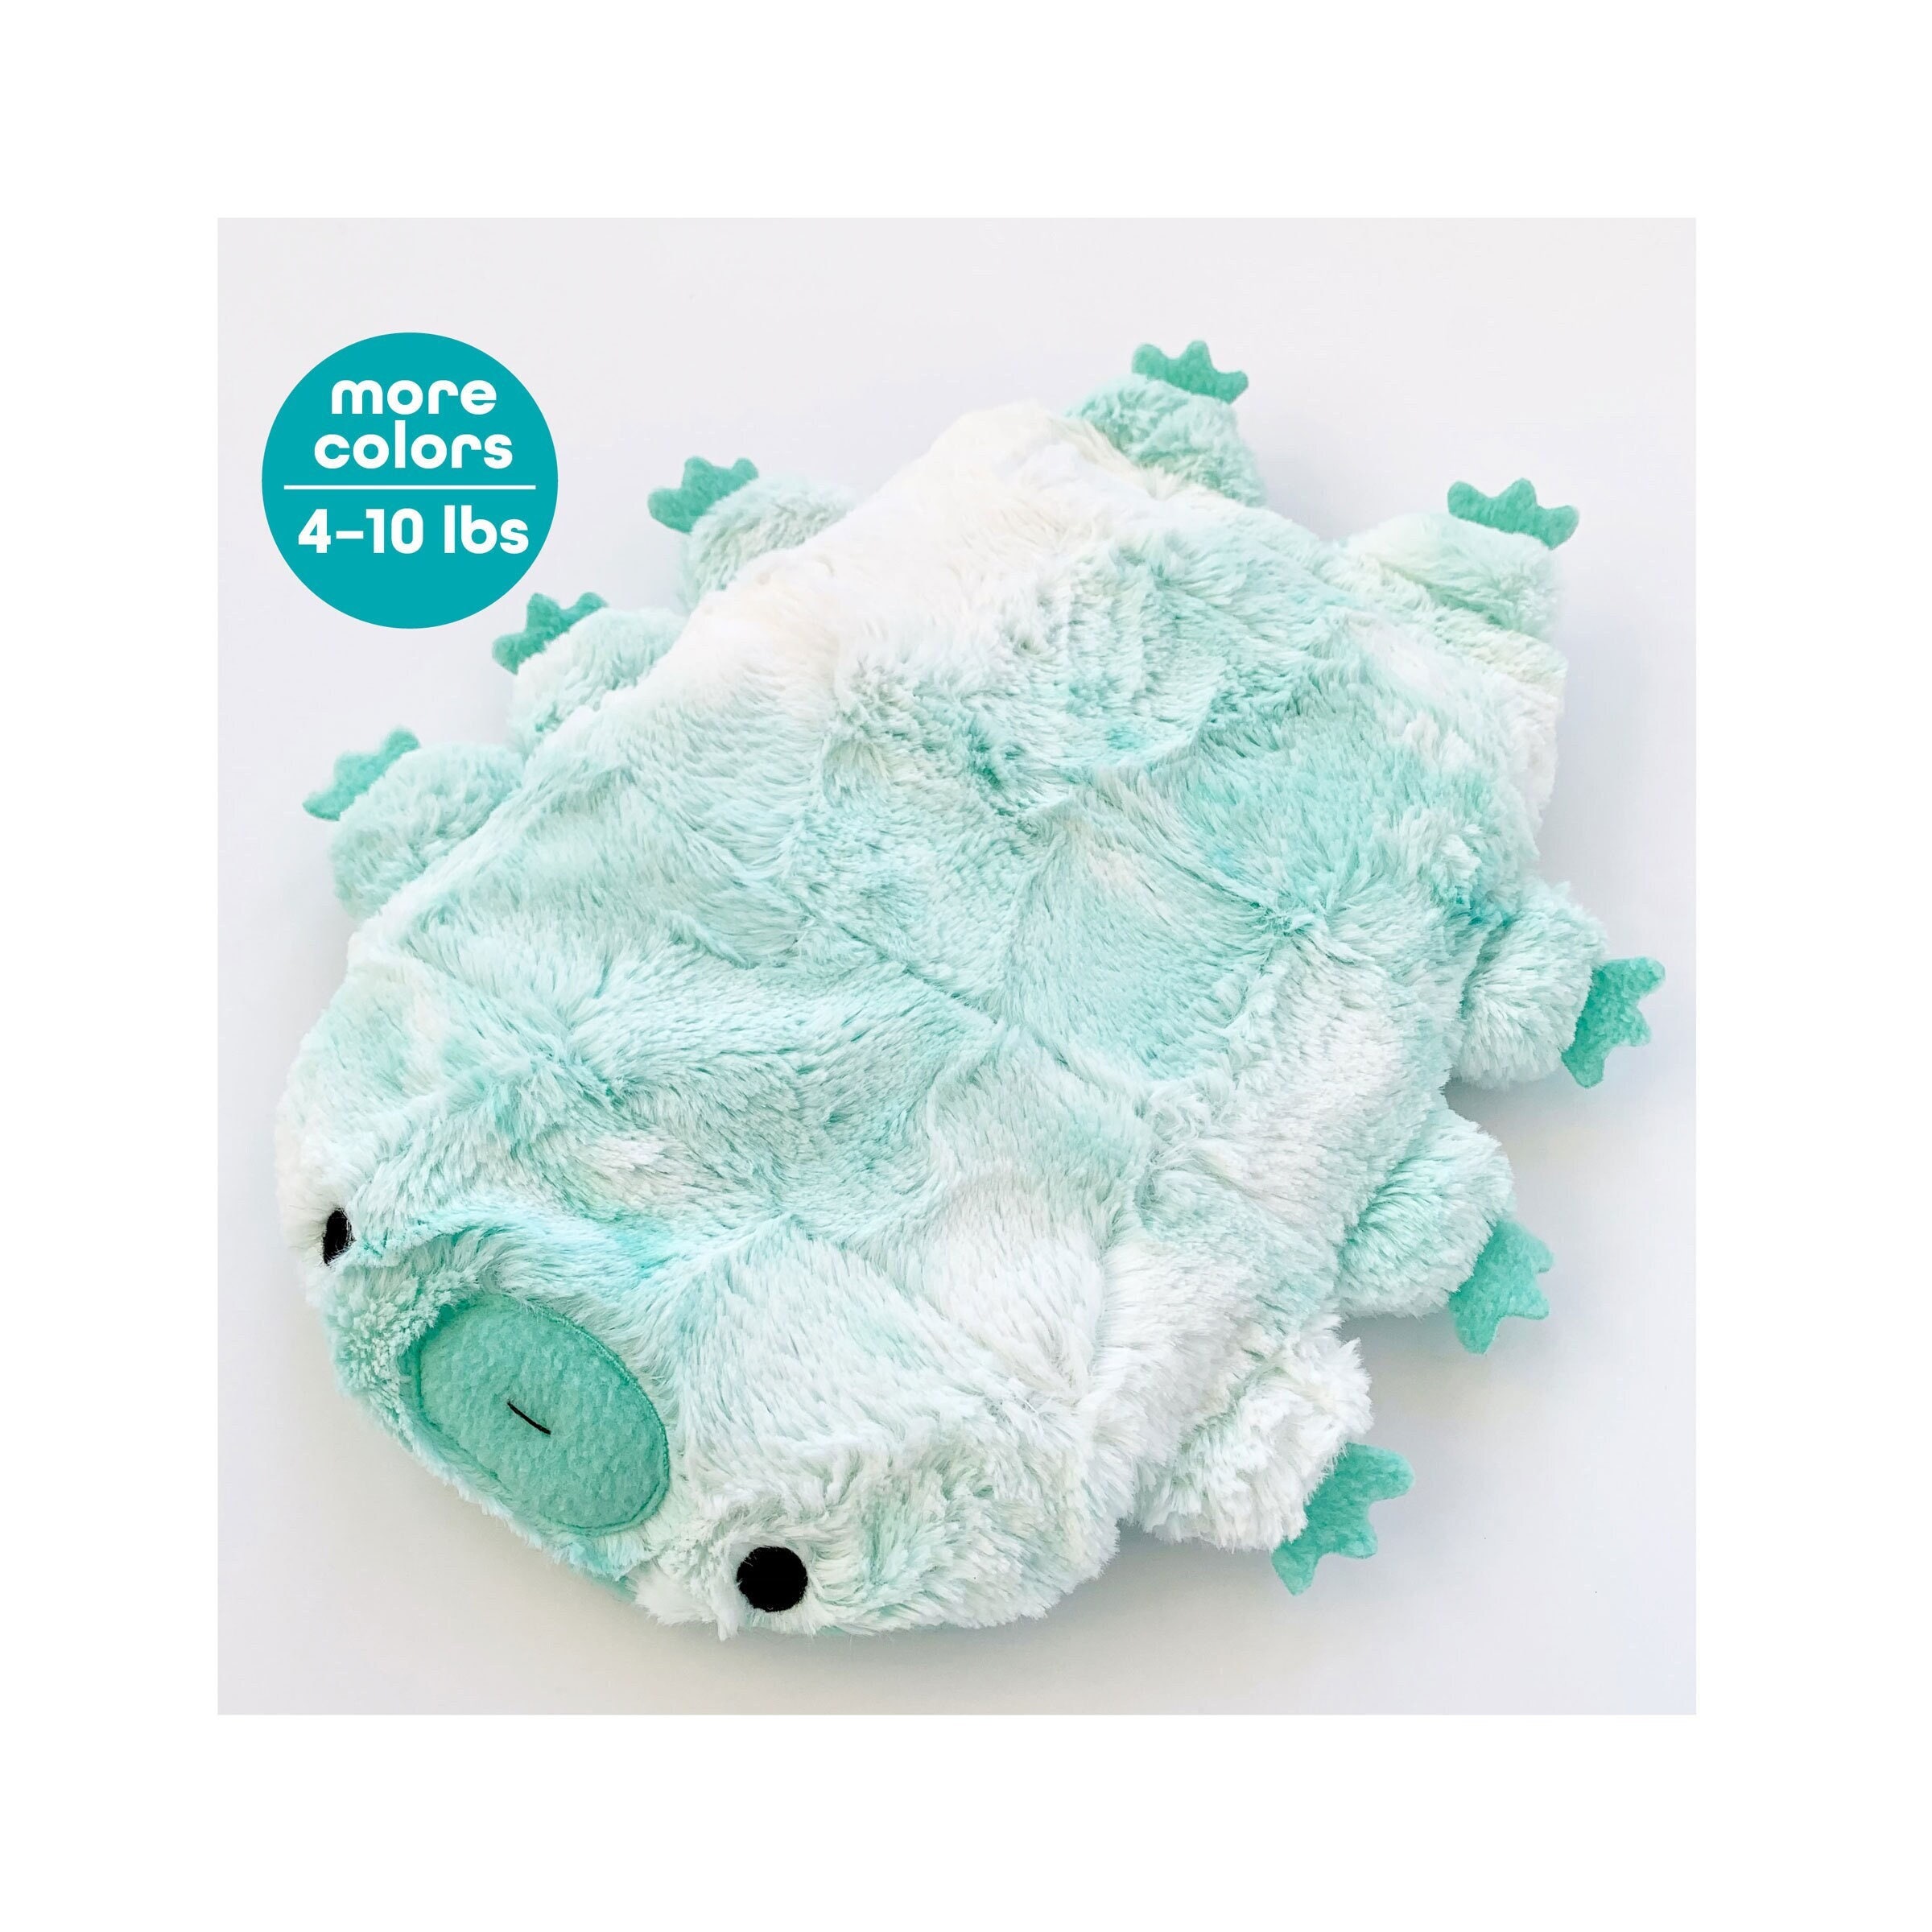 11 Colors Cute Water Bear Weighted Plush Tardigrade Animal | Comfort Hug Pillow | Washable | Heatable | Unique Science Gift | MADE TO ORDER